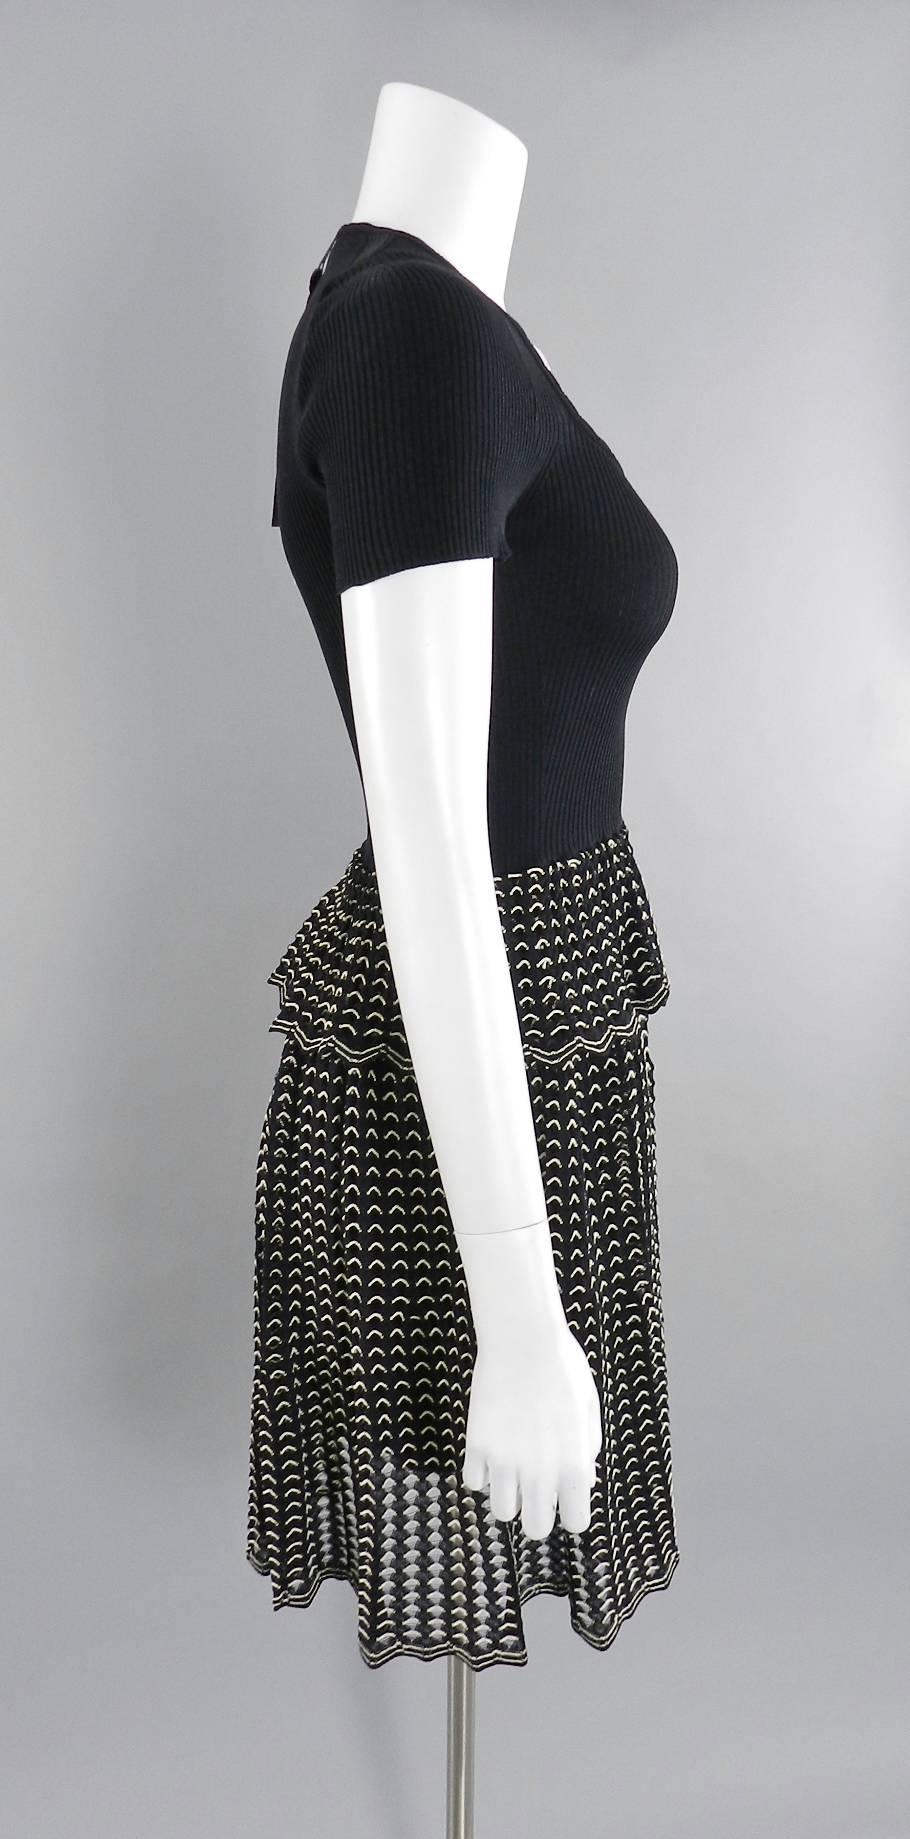 Alexander McQueen black ribbed stretch knit dress with black and white eyelet skirt.  New with tags.  Stretchy pullover design with no zippers or closures.  Tagged size M (approx. size USA 6/8). To fit 34-35" bust, 27-29" waist, semi full